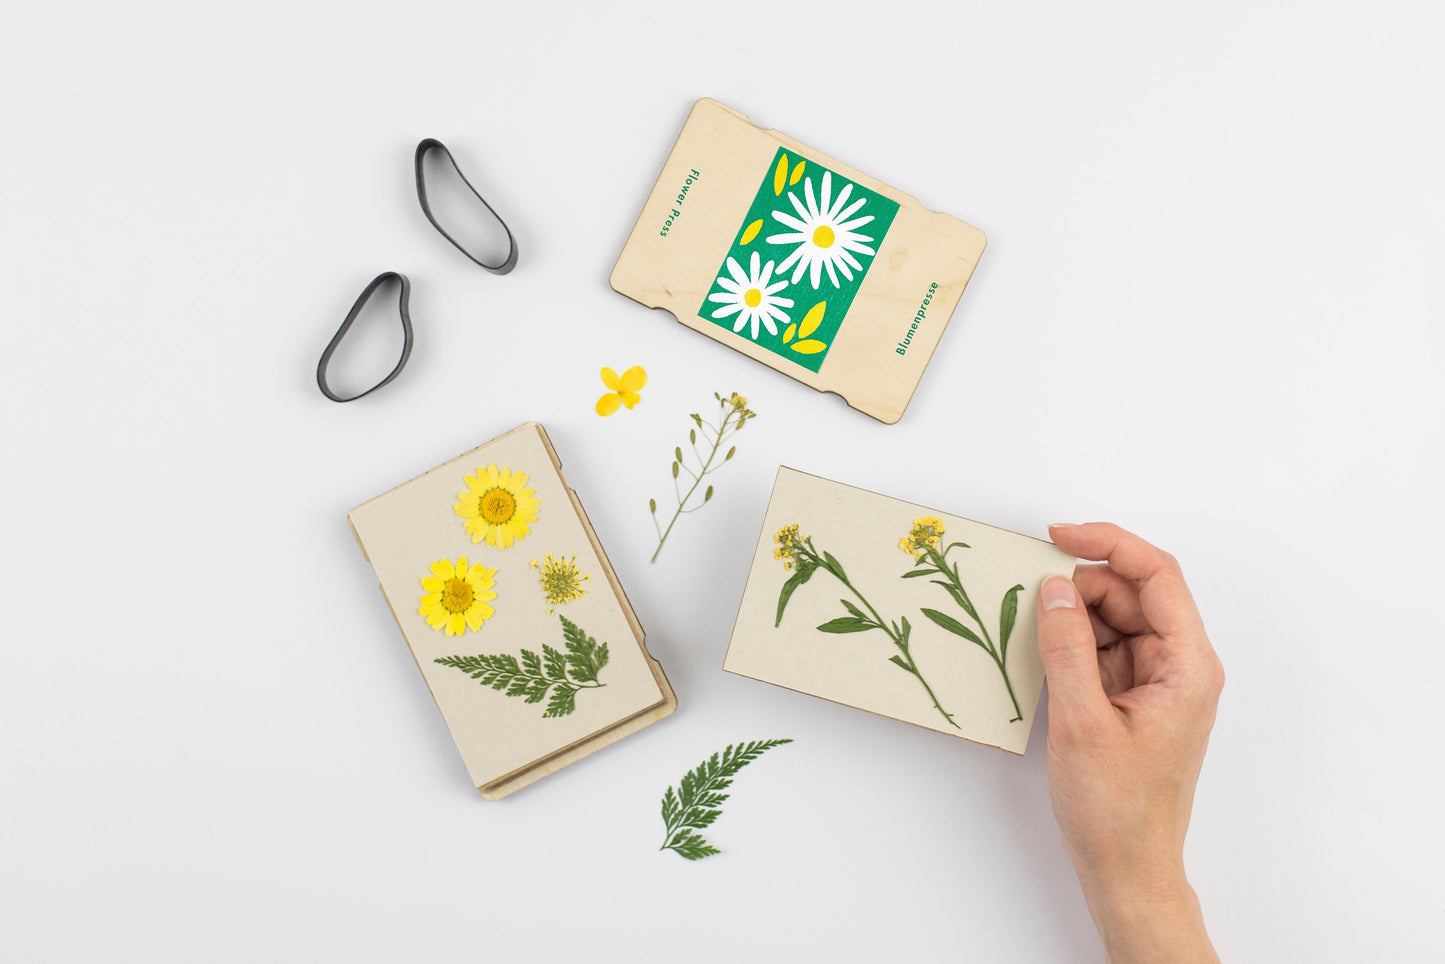 Load image into Gallery viewer, A de-assembled Pocket-sized flower press with daisy illustration photographed against white background
